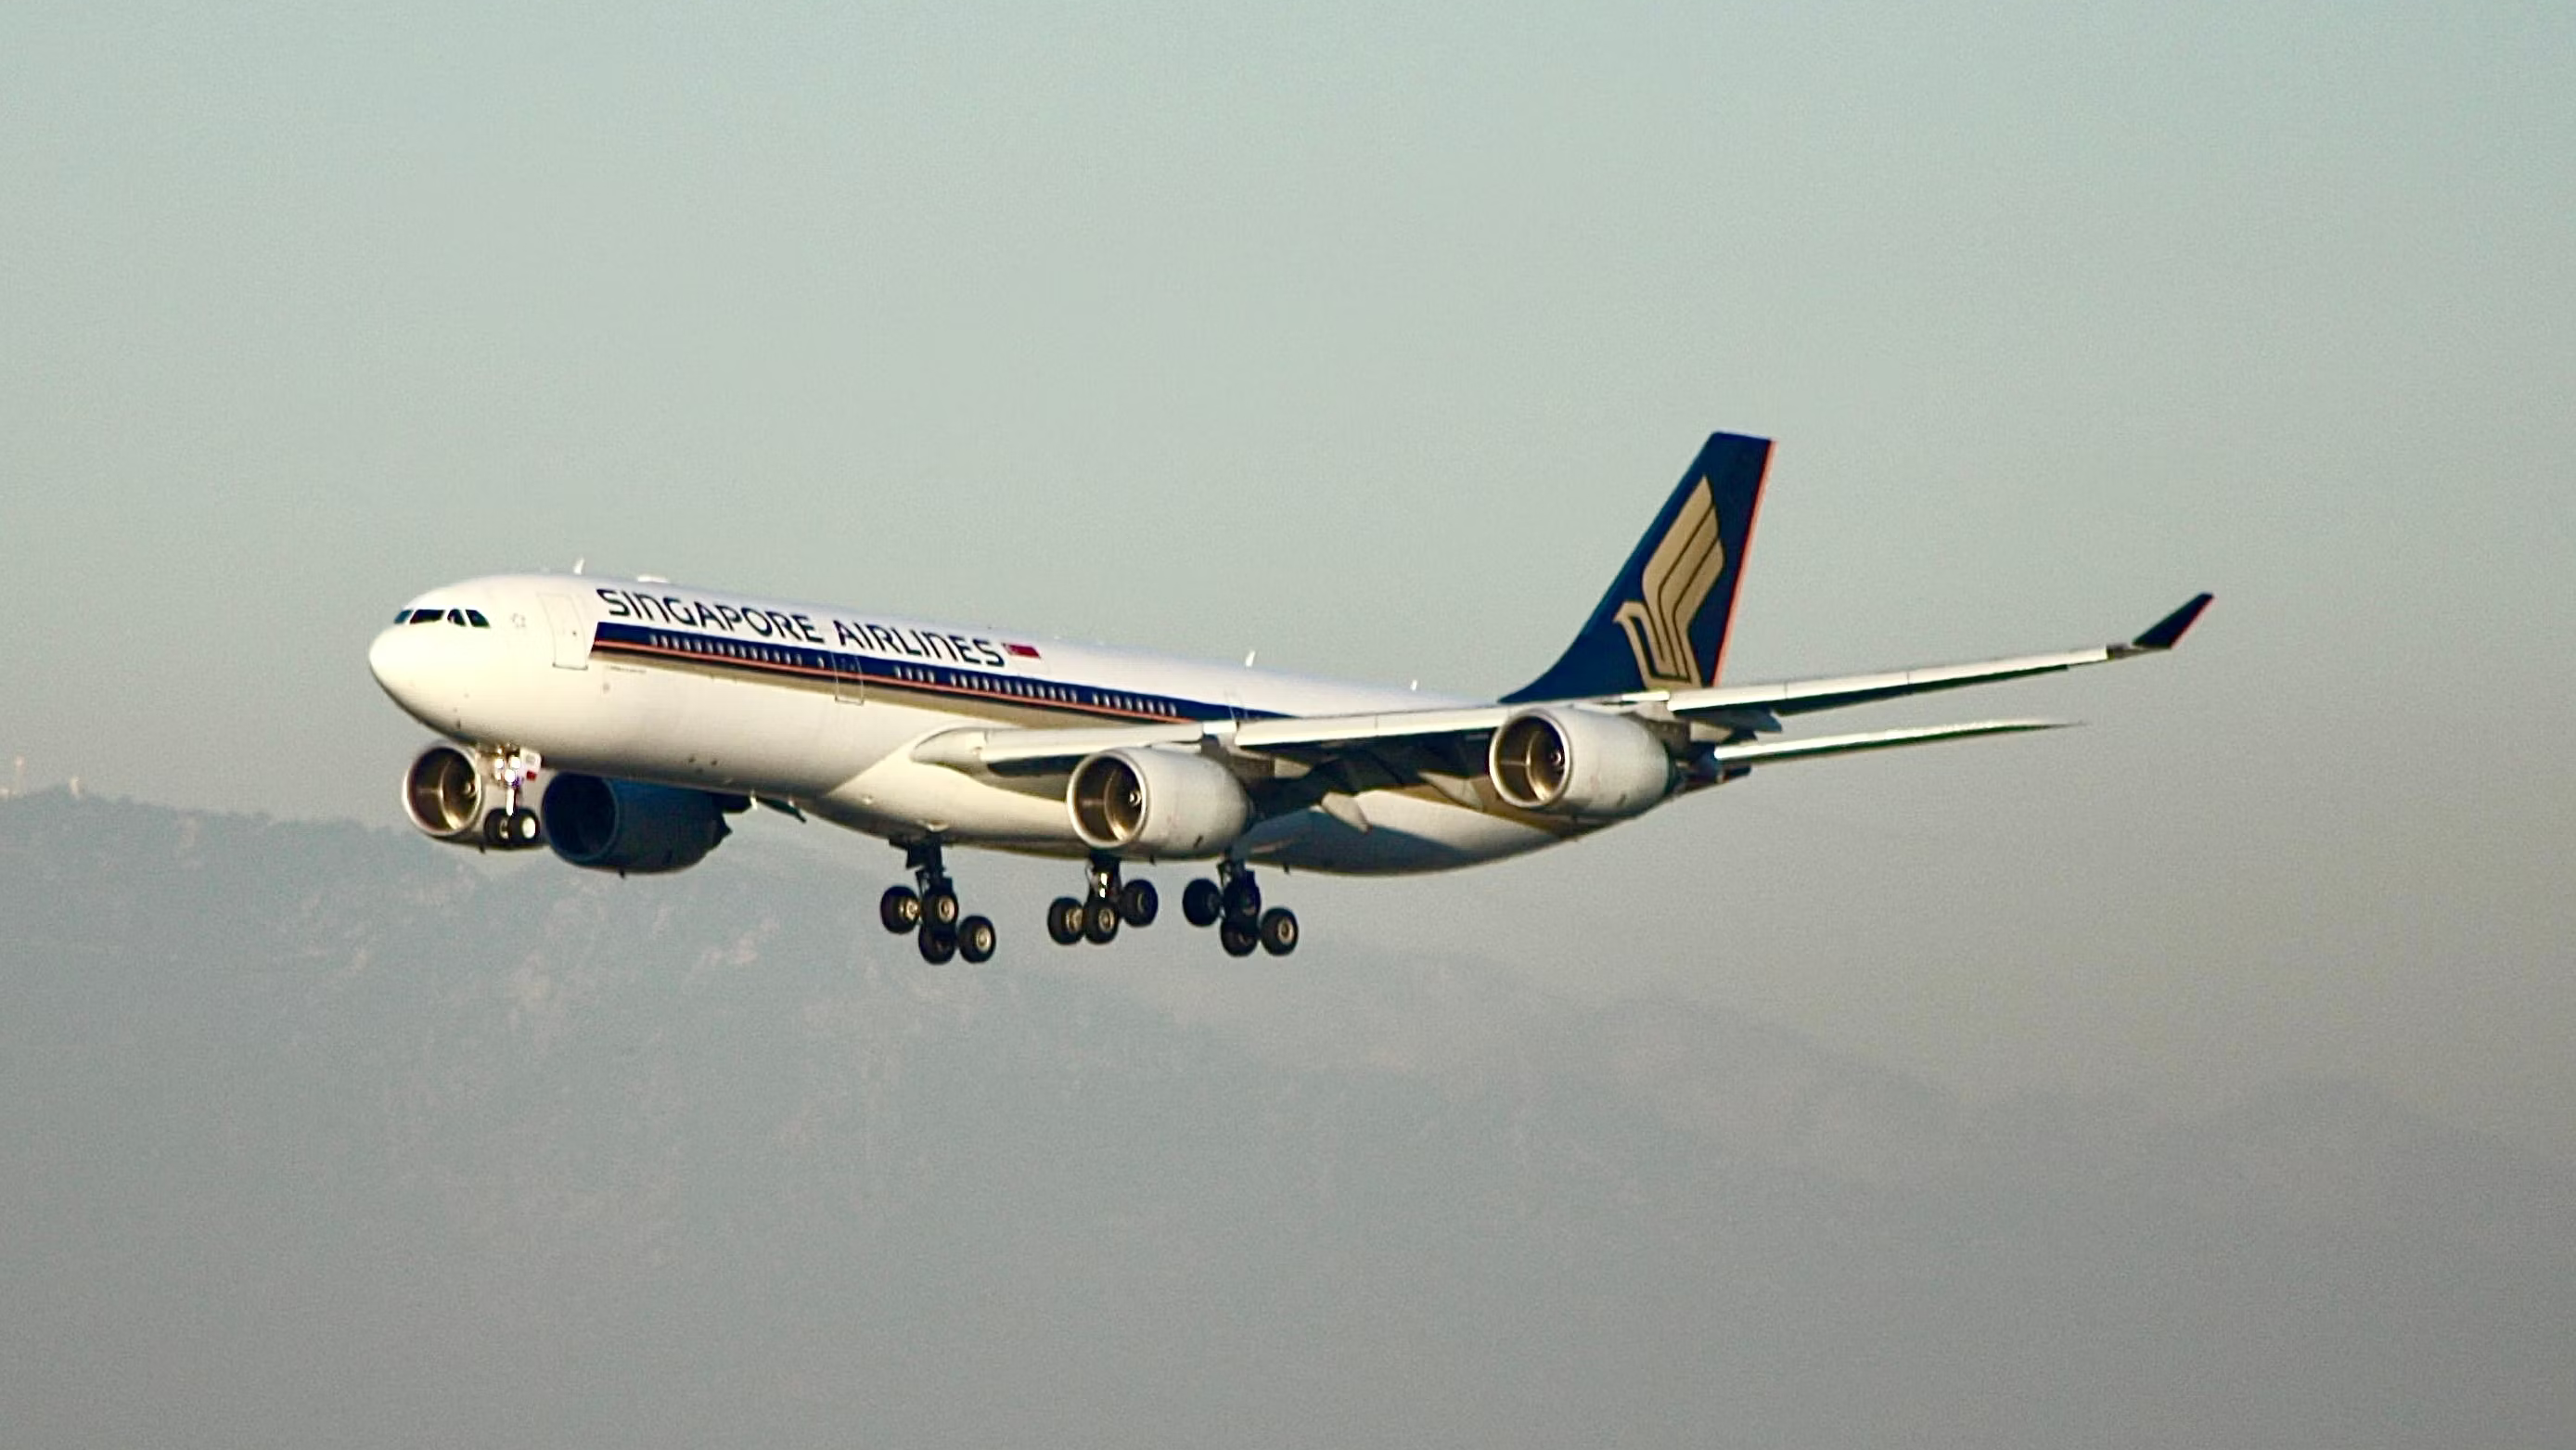 A Singapore Airlines A340-300 flying in the sky.